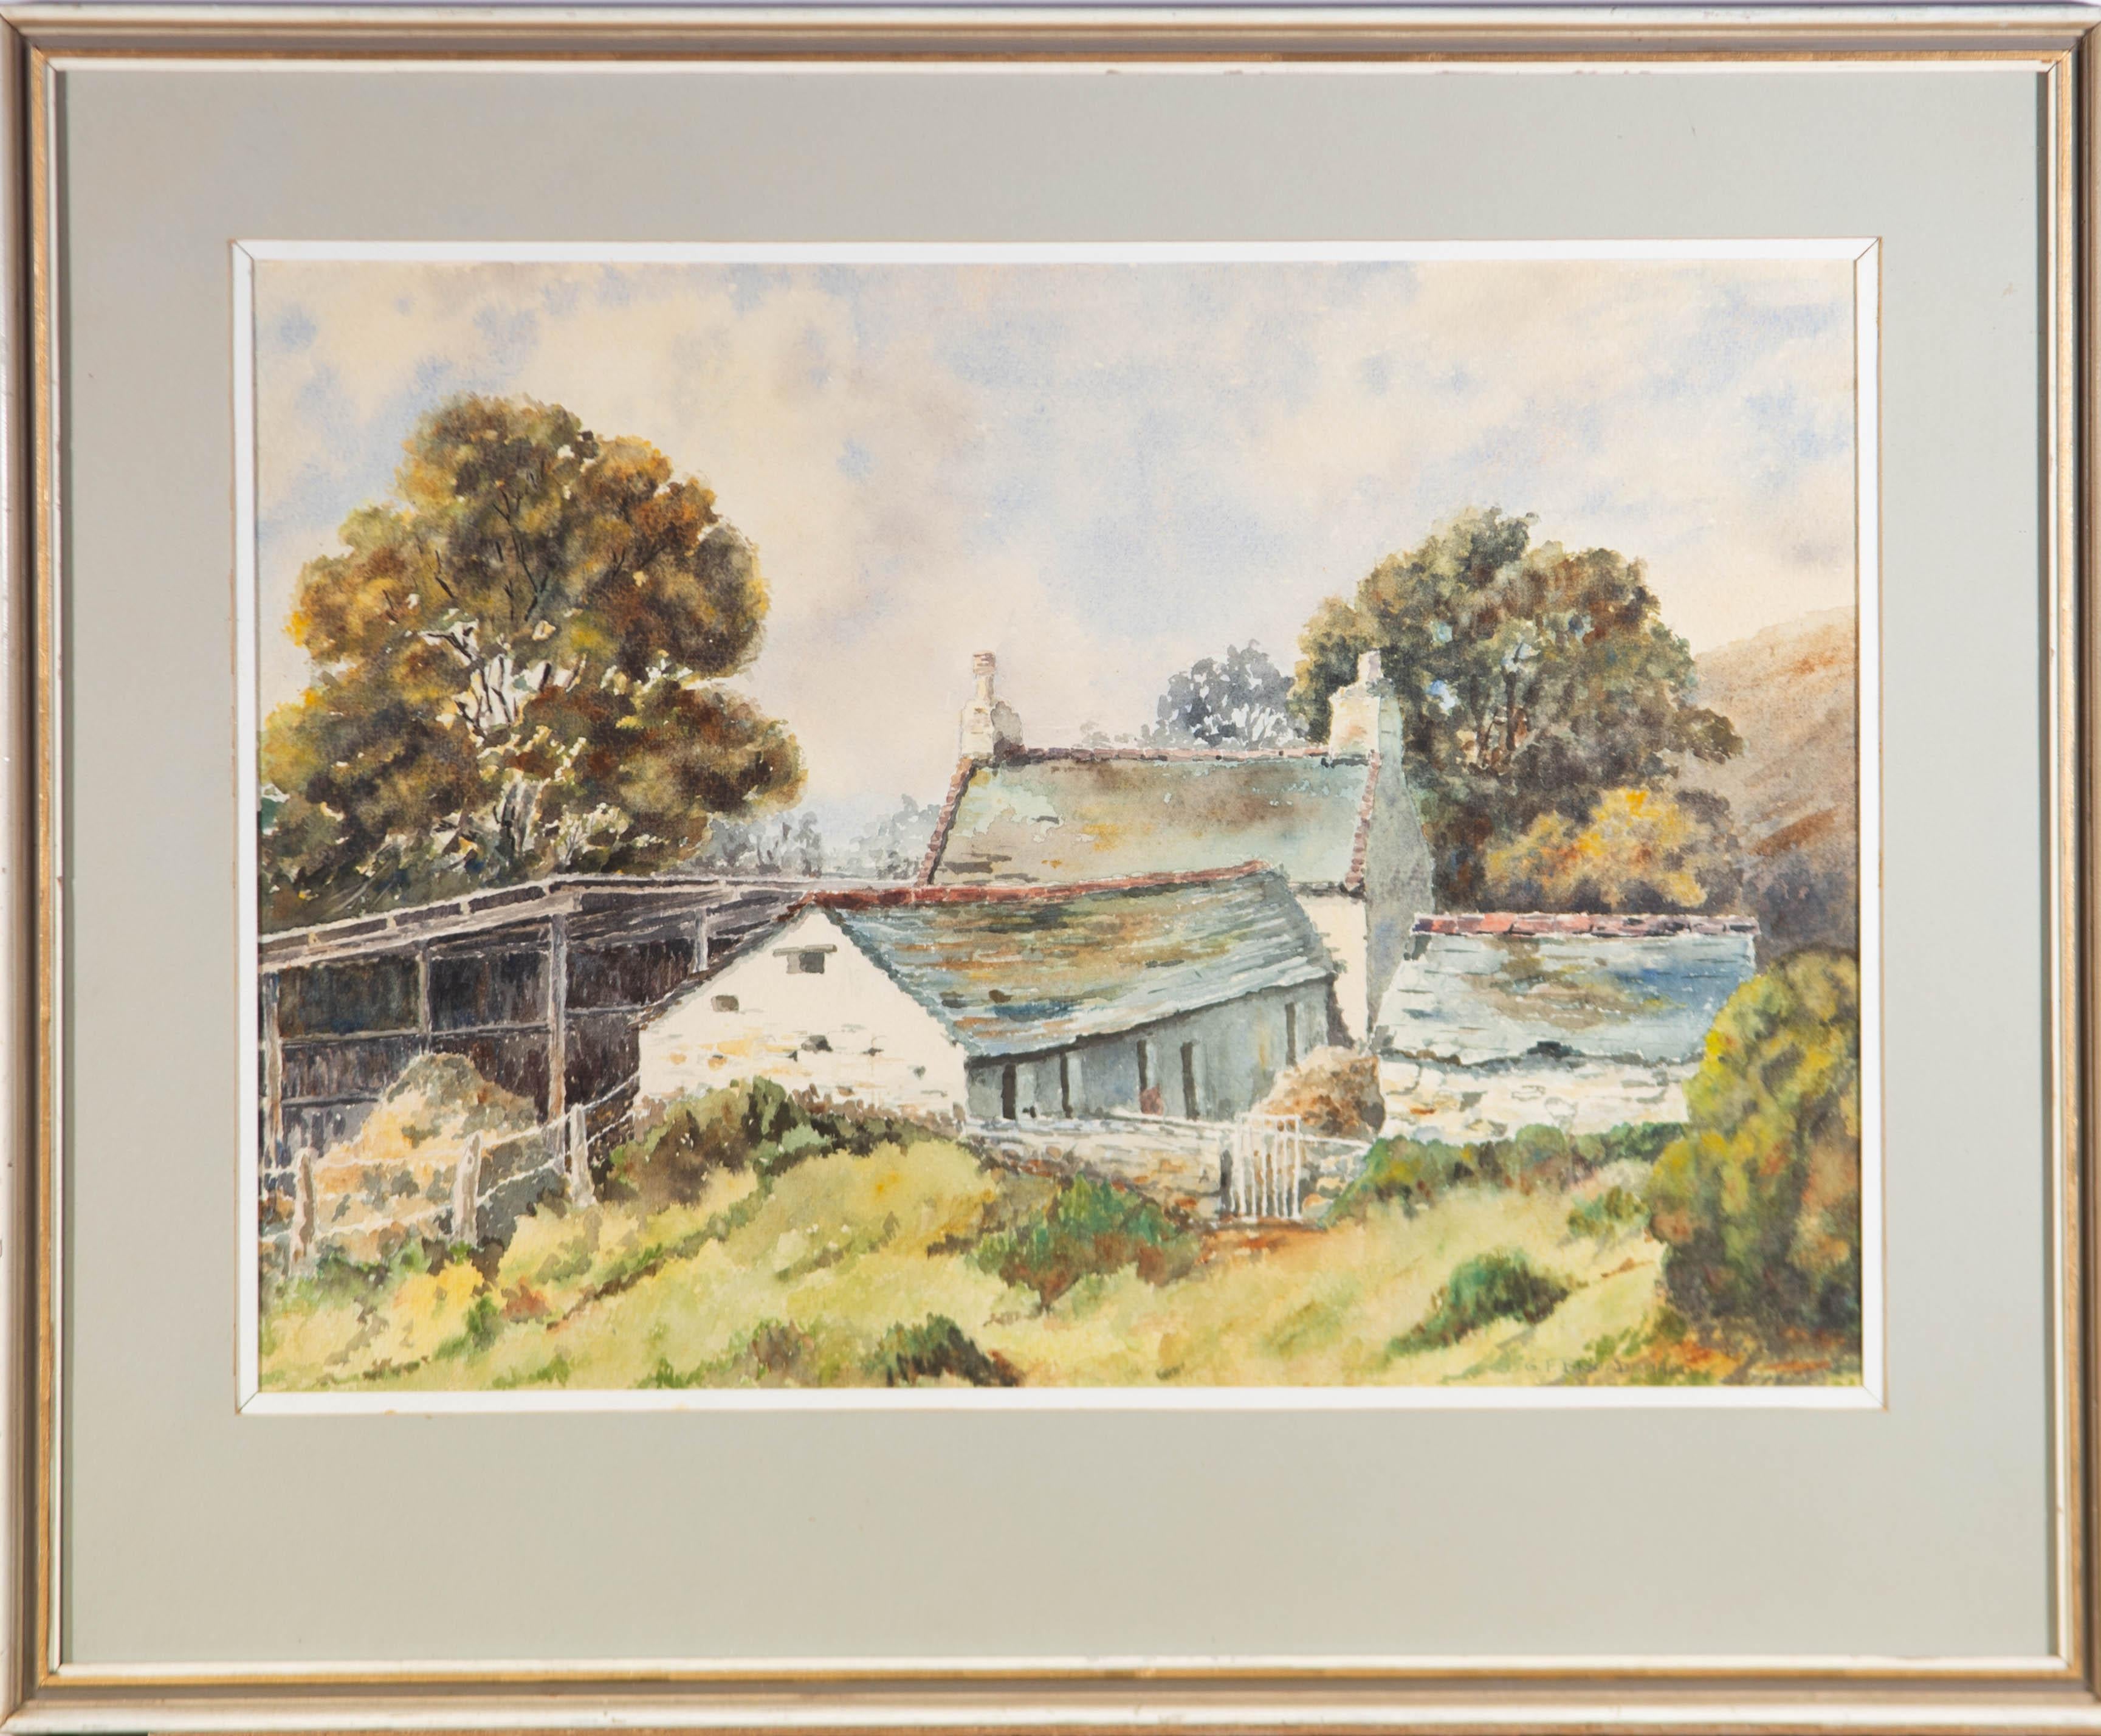 A charming watercolour painting by G.F. Broad, depicting a farm scene in the Welsh island of Anglesey. Signed and dated to the lower right-hand corner. There is an artist's label to the reverse inscribed with the artist's name and title.